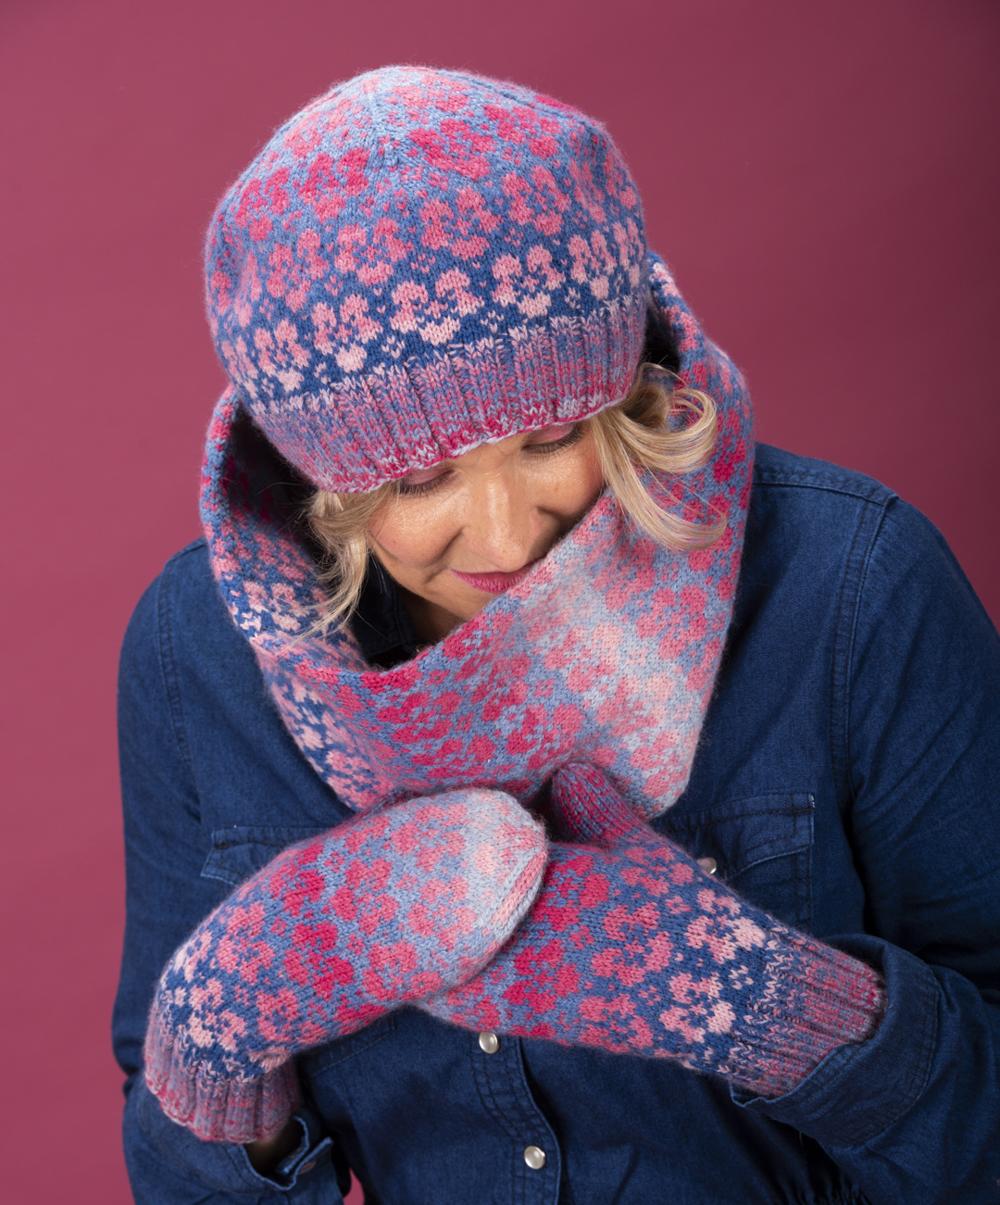 A white woman wears a dark blue denim dress, accessorised by a matching floral/ombre set of mittens, hat and cowl